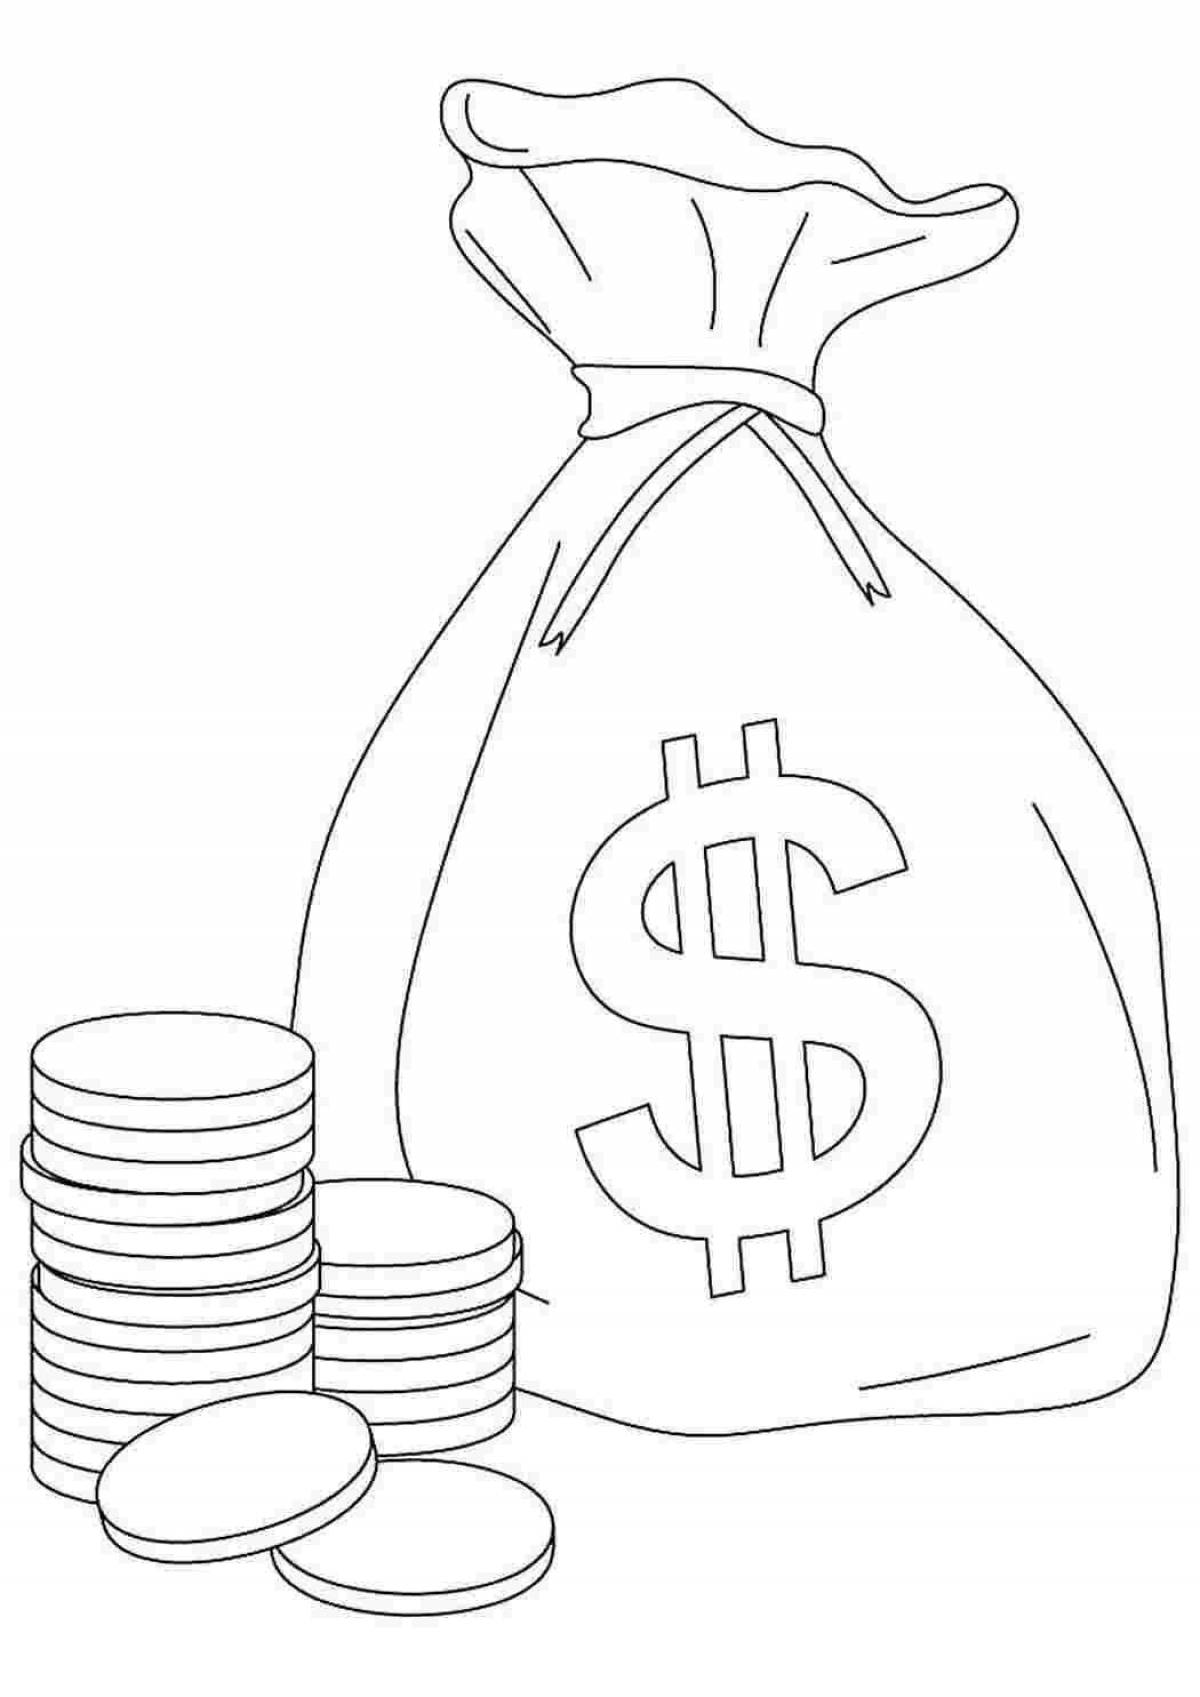 Fun coloring book for kids about financial literacy